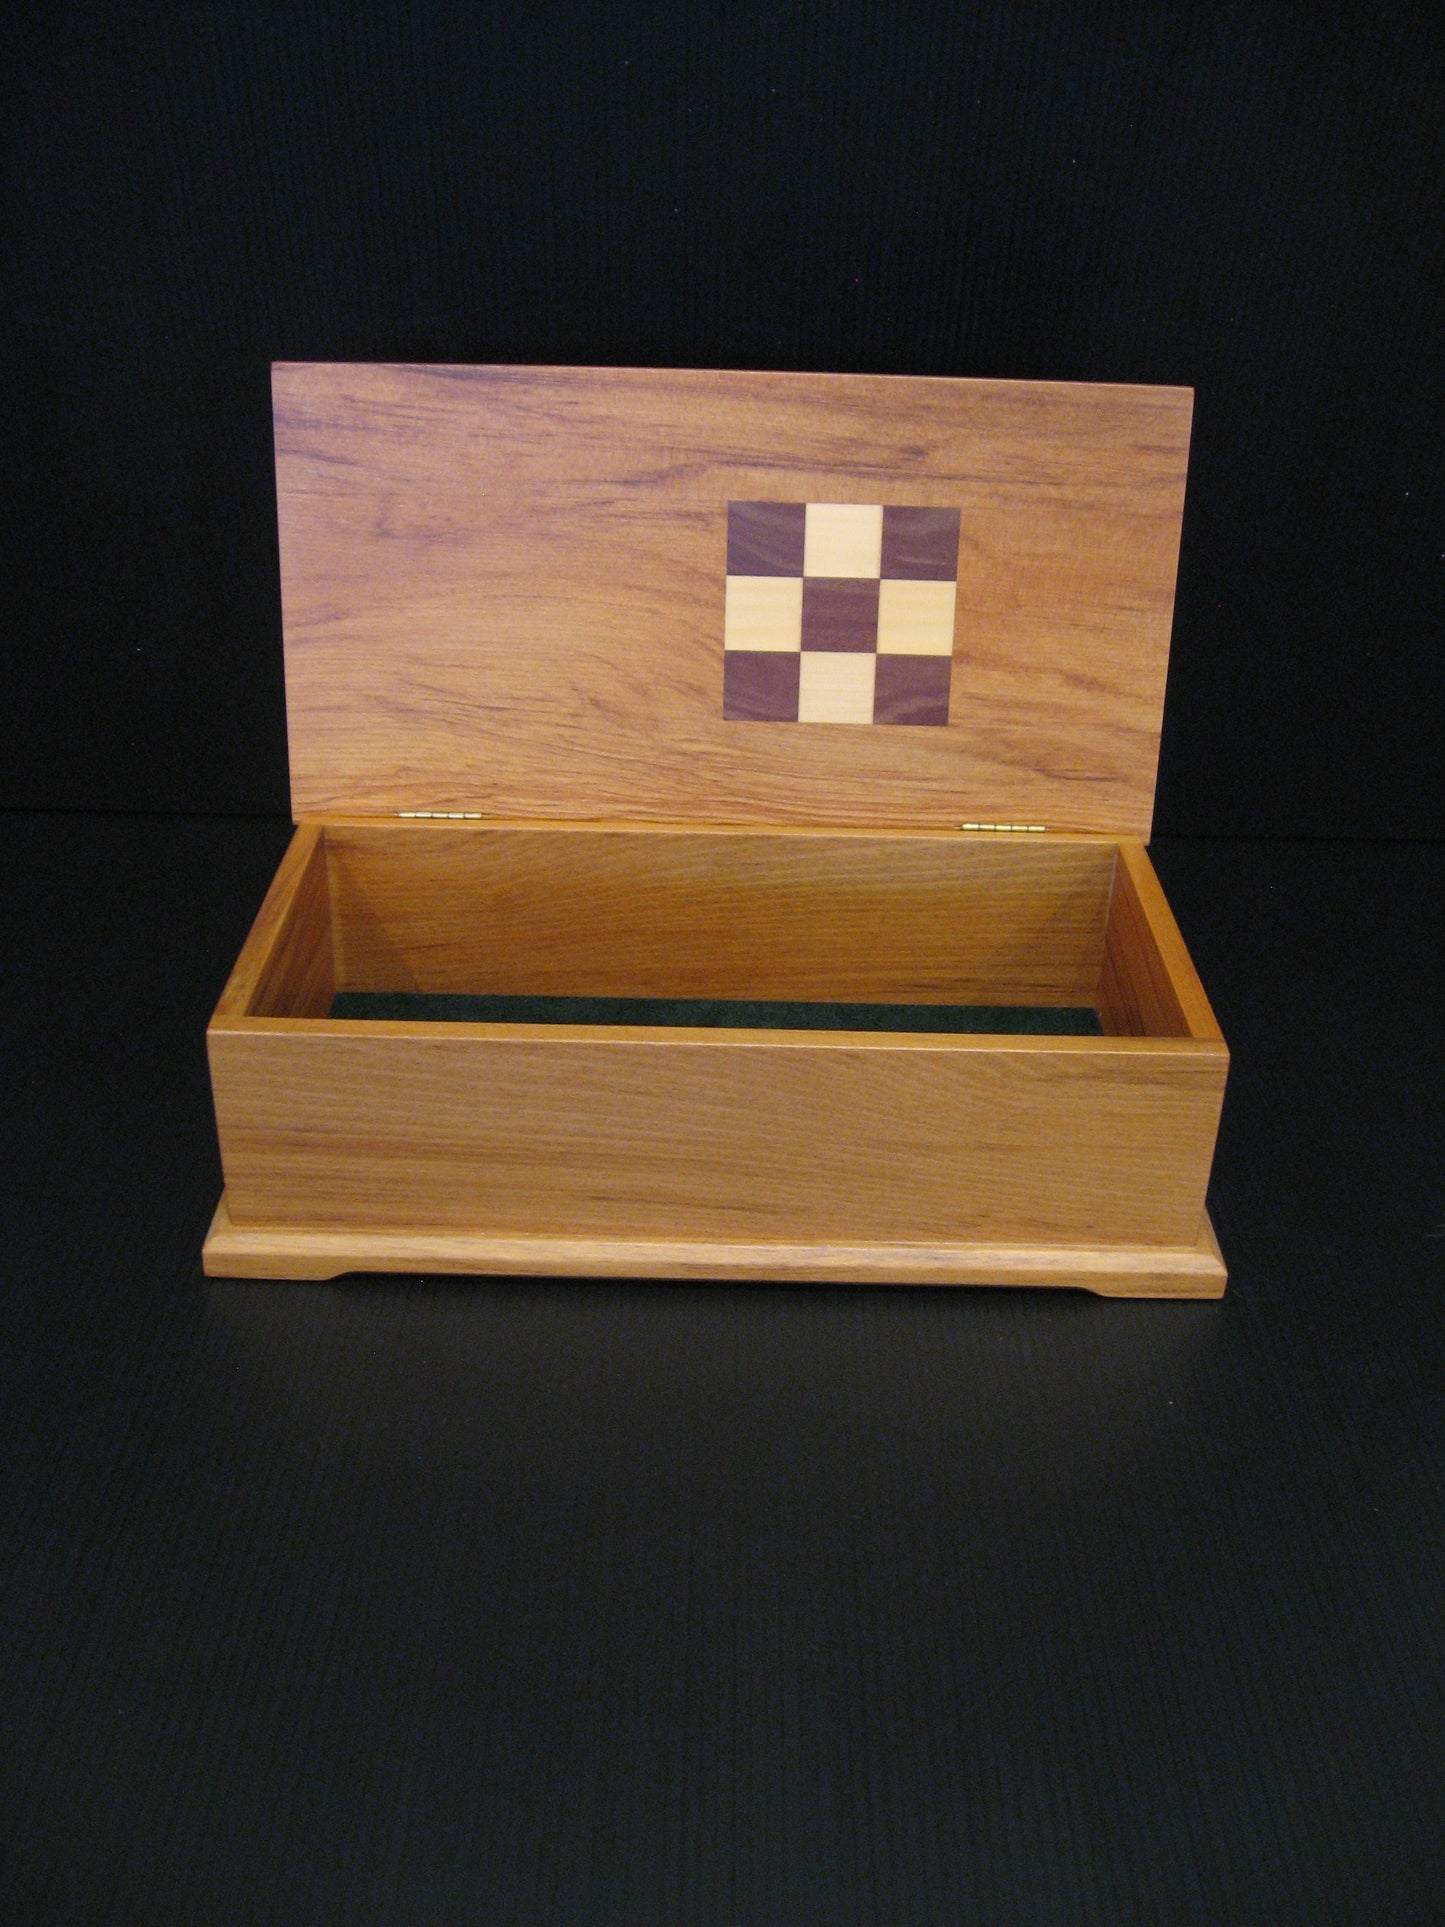 Inside Rimu Patterned Wooden Box by Timber Arts of New Zealand Silver Fern Gallery